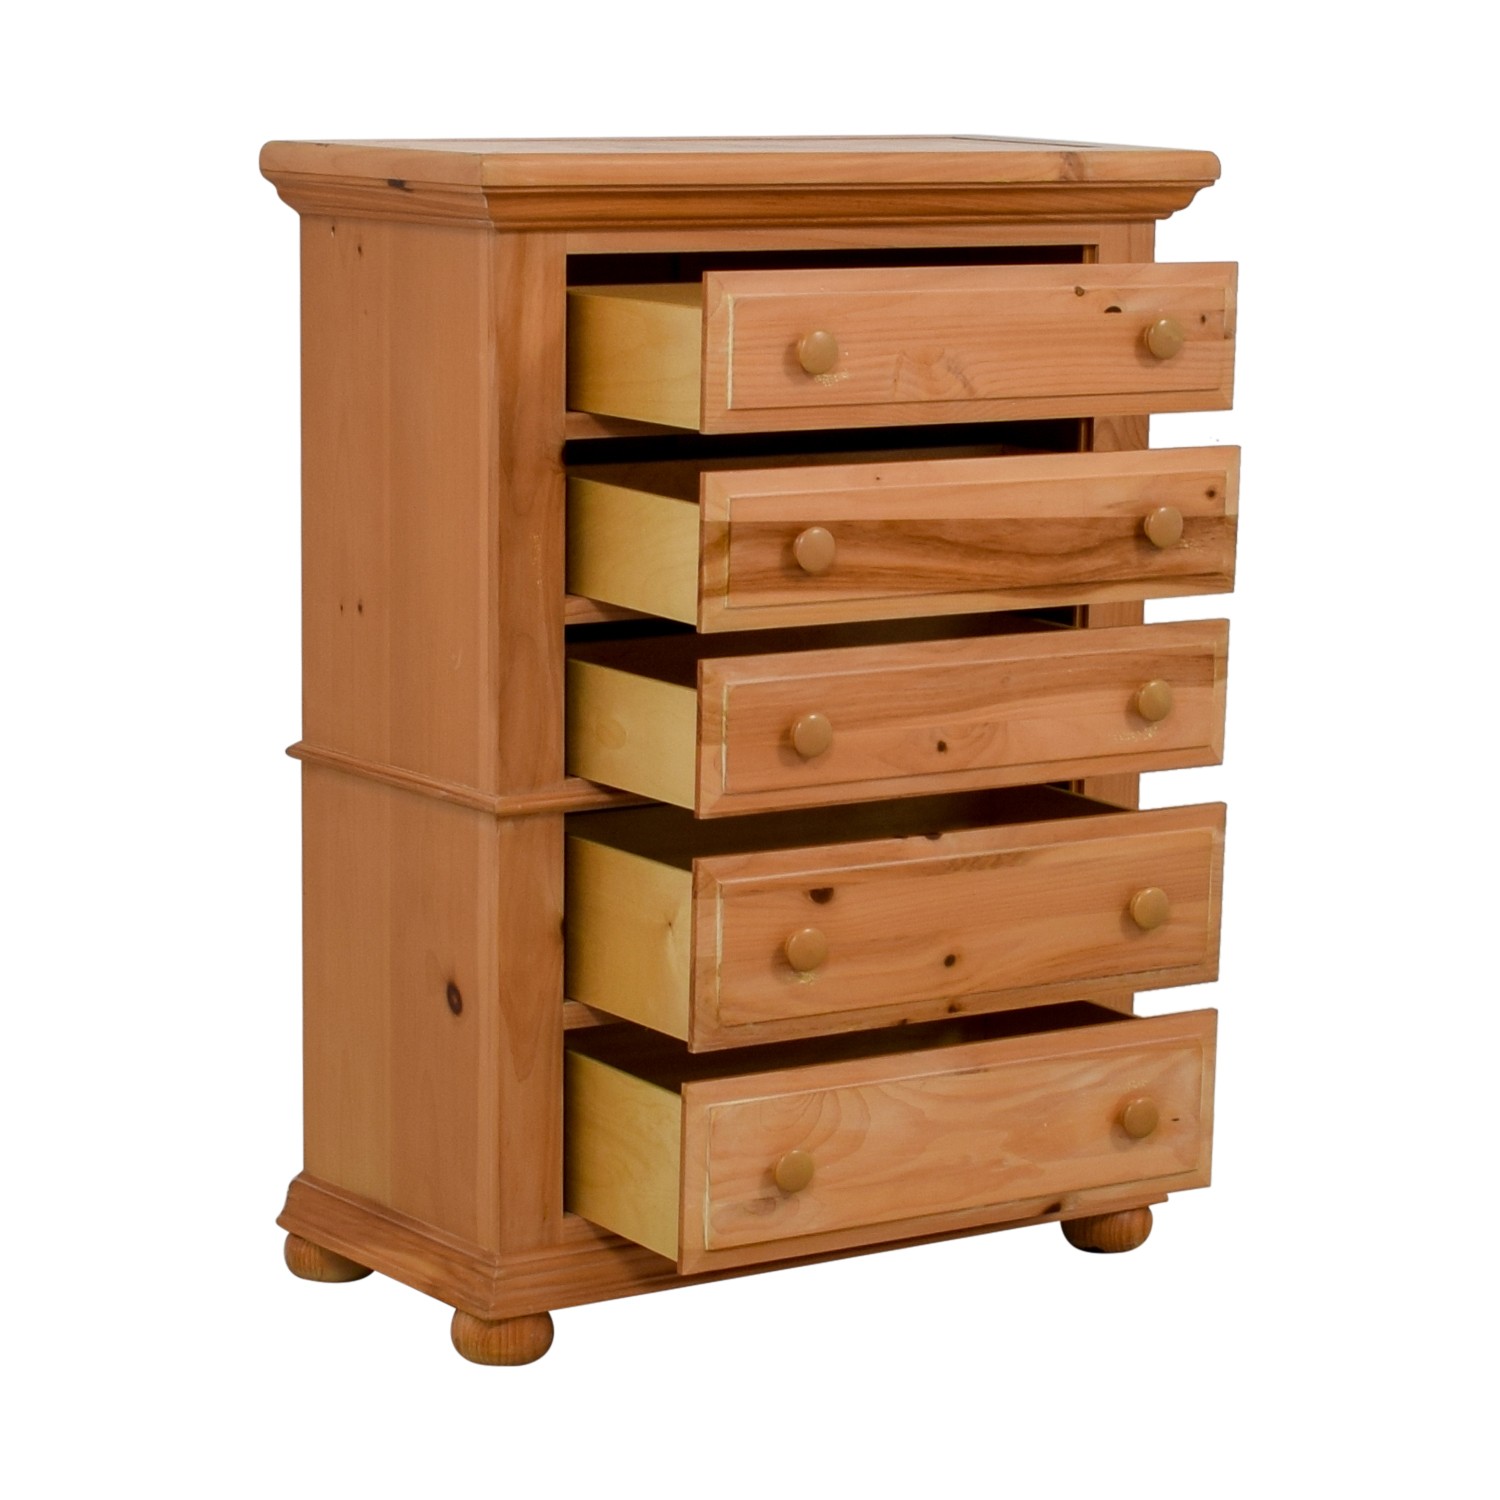 69 off broyhill furniture broyhill natural wood five